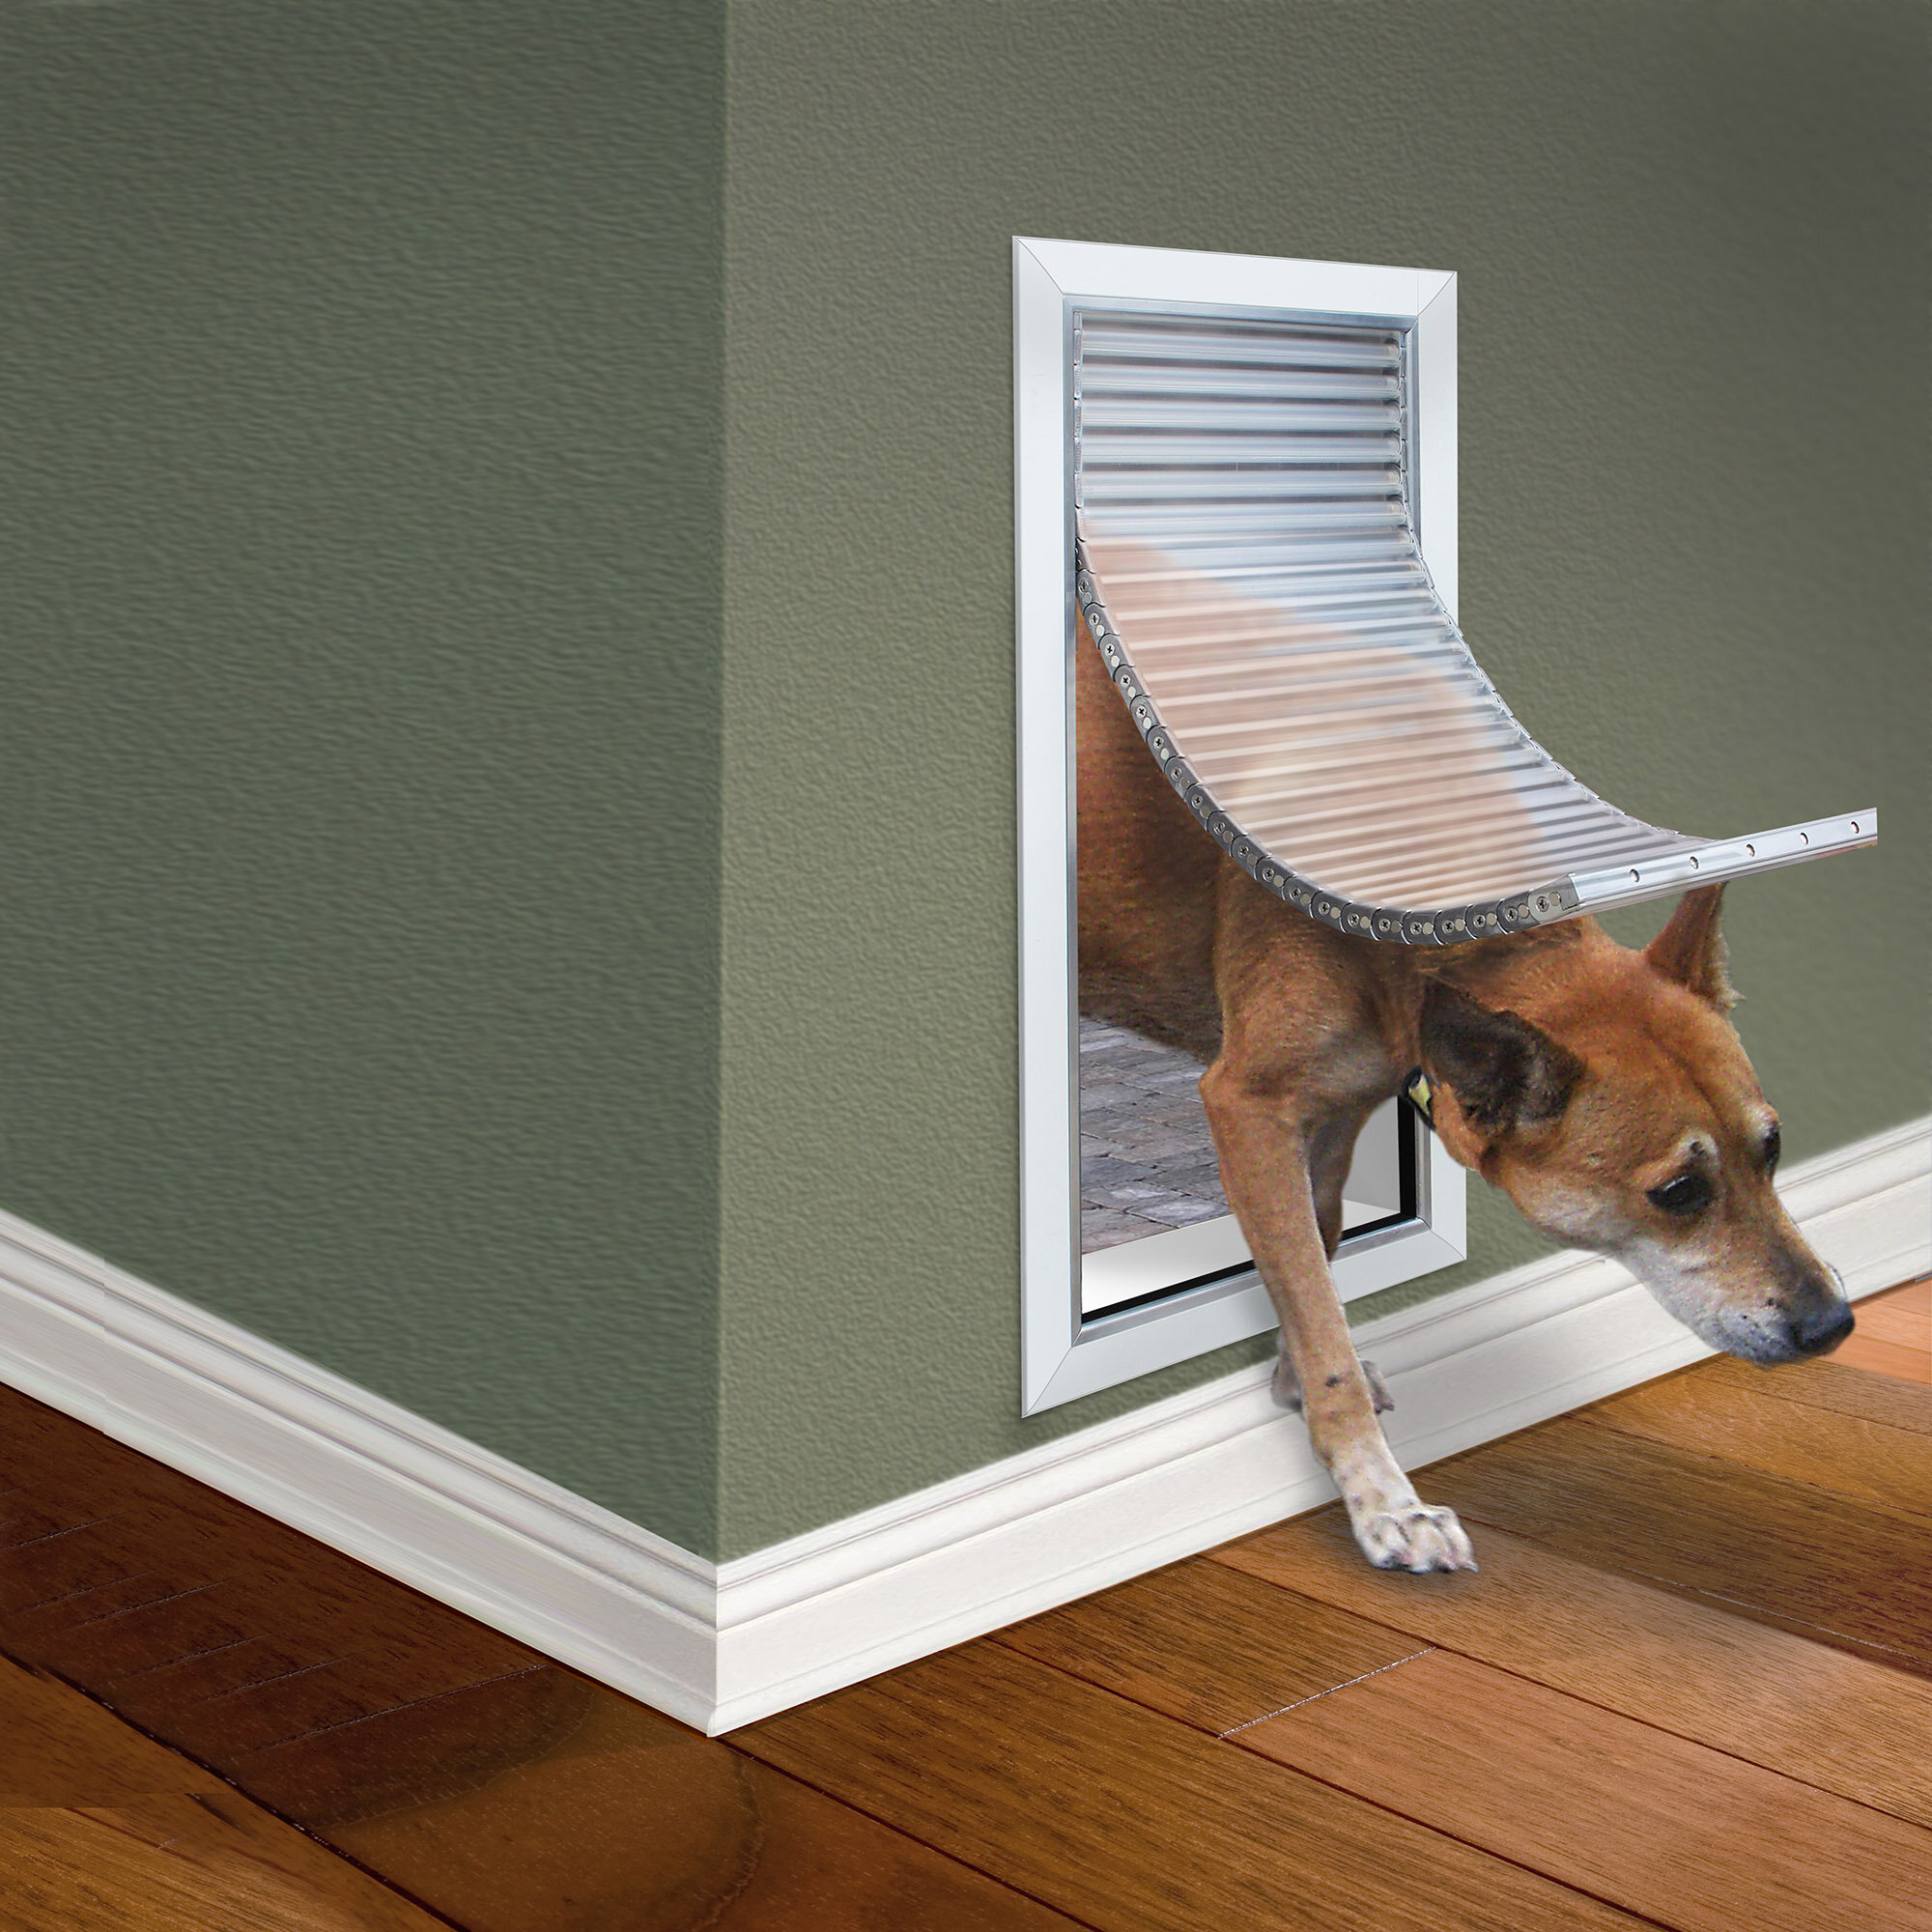 How To Install A Doggie Door In A Wall With Vinyl Siding - How To Install A Doggie Door In A Wall